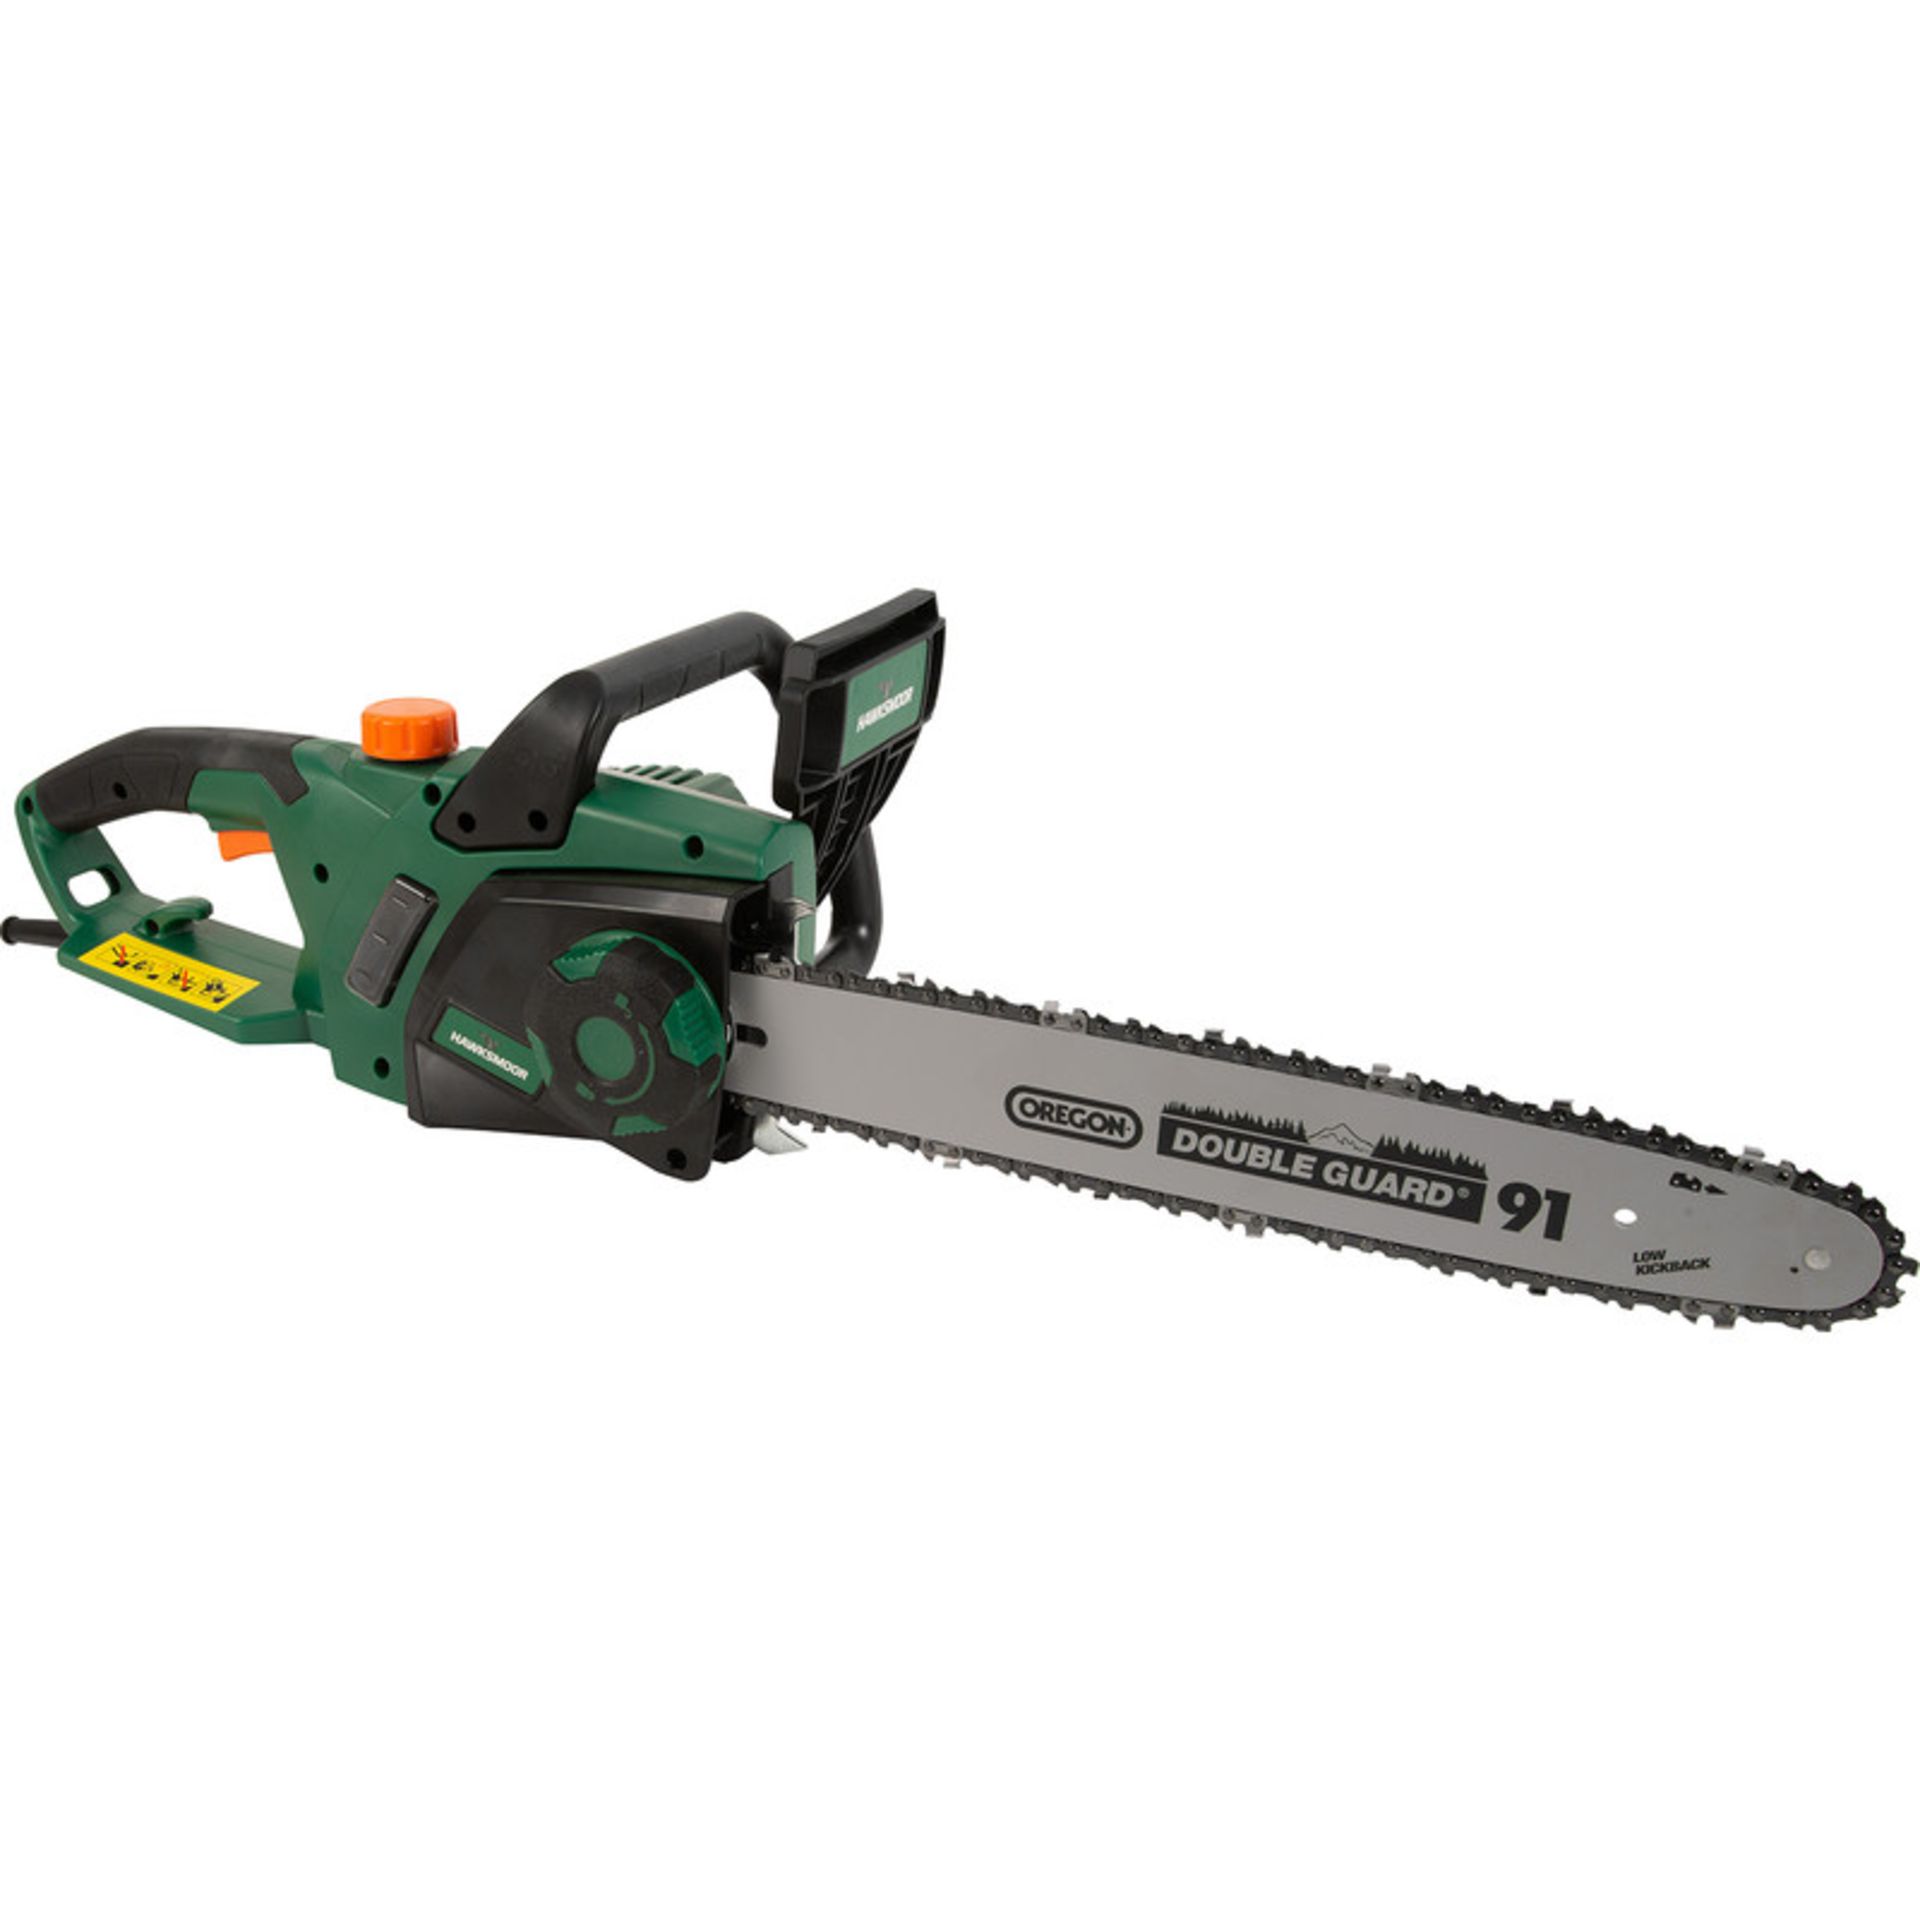 Boxed Hawksmoor 2.2kW 40cm Electric Chainsaw 230V. 40cm Oregon bar and chain • Automatic chain